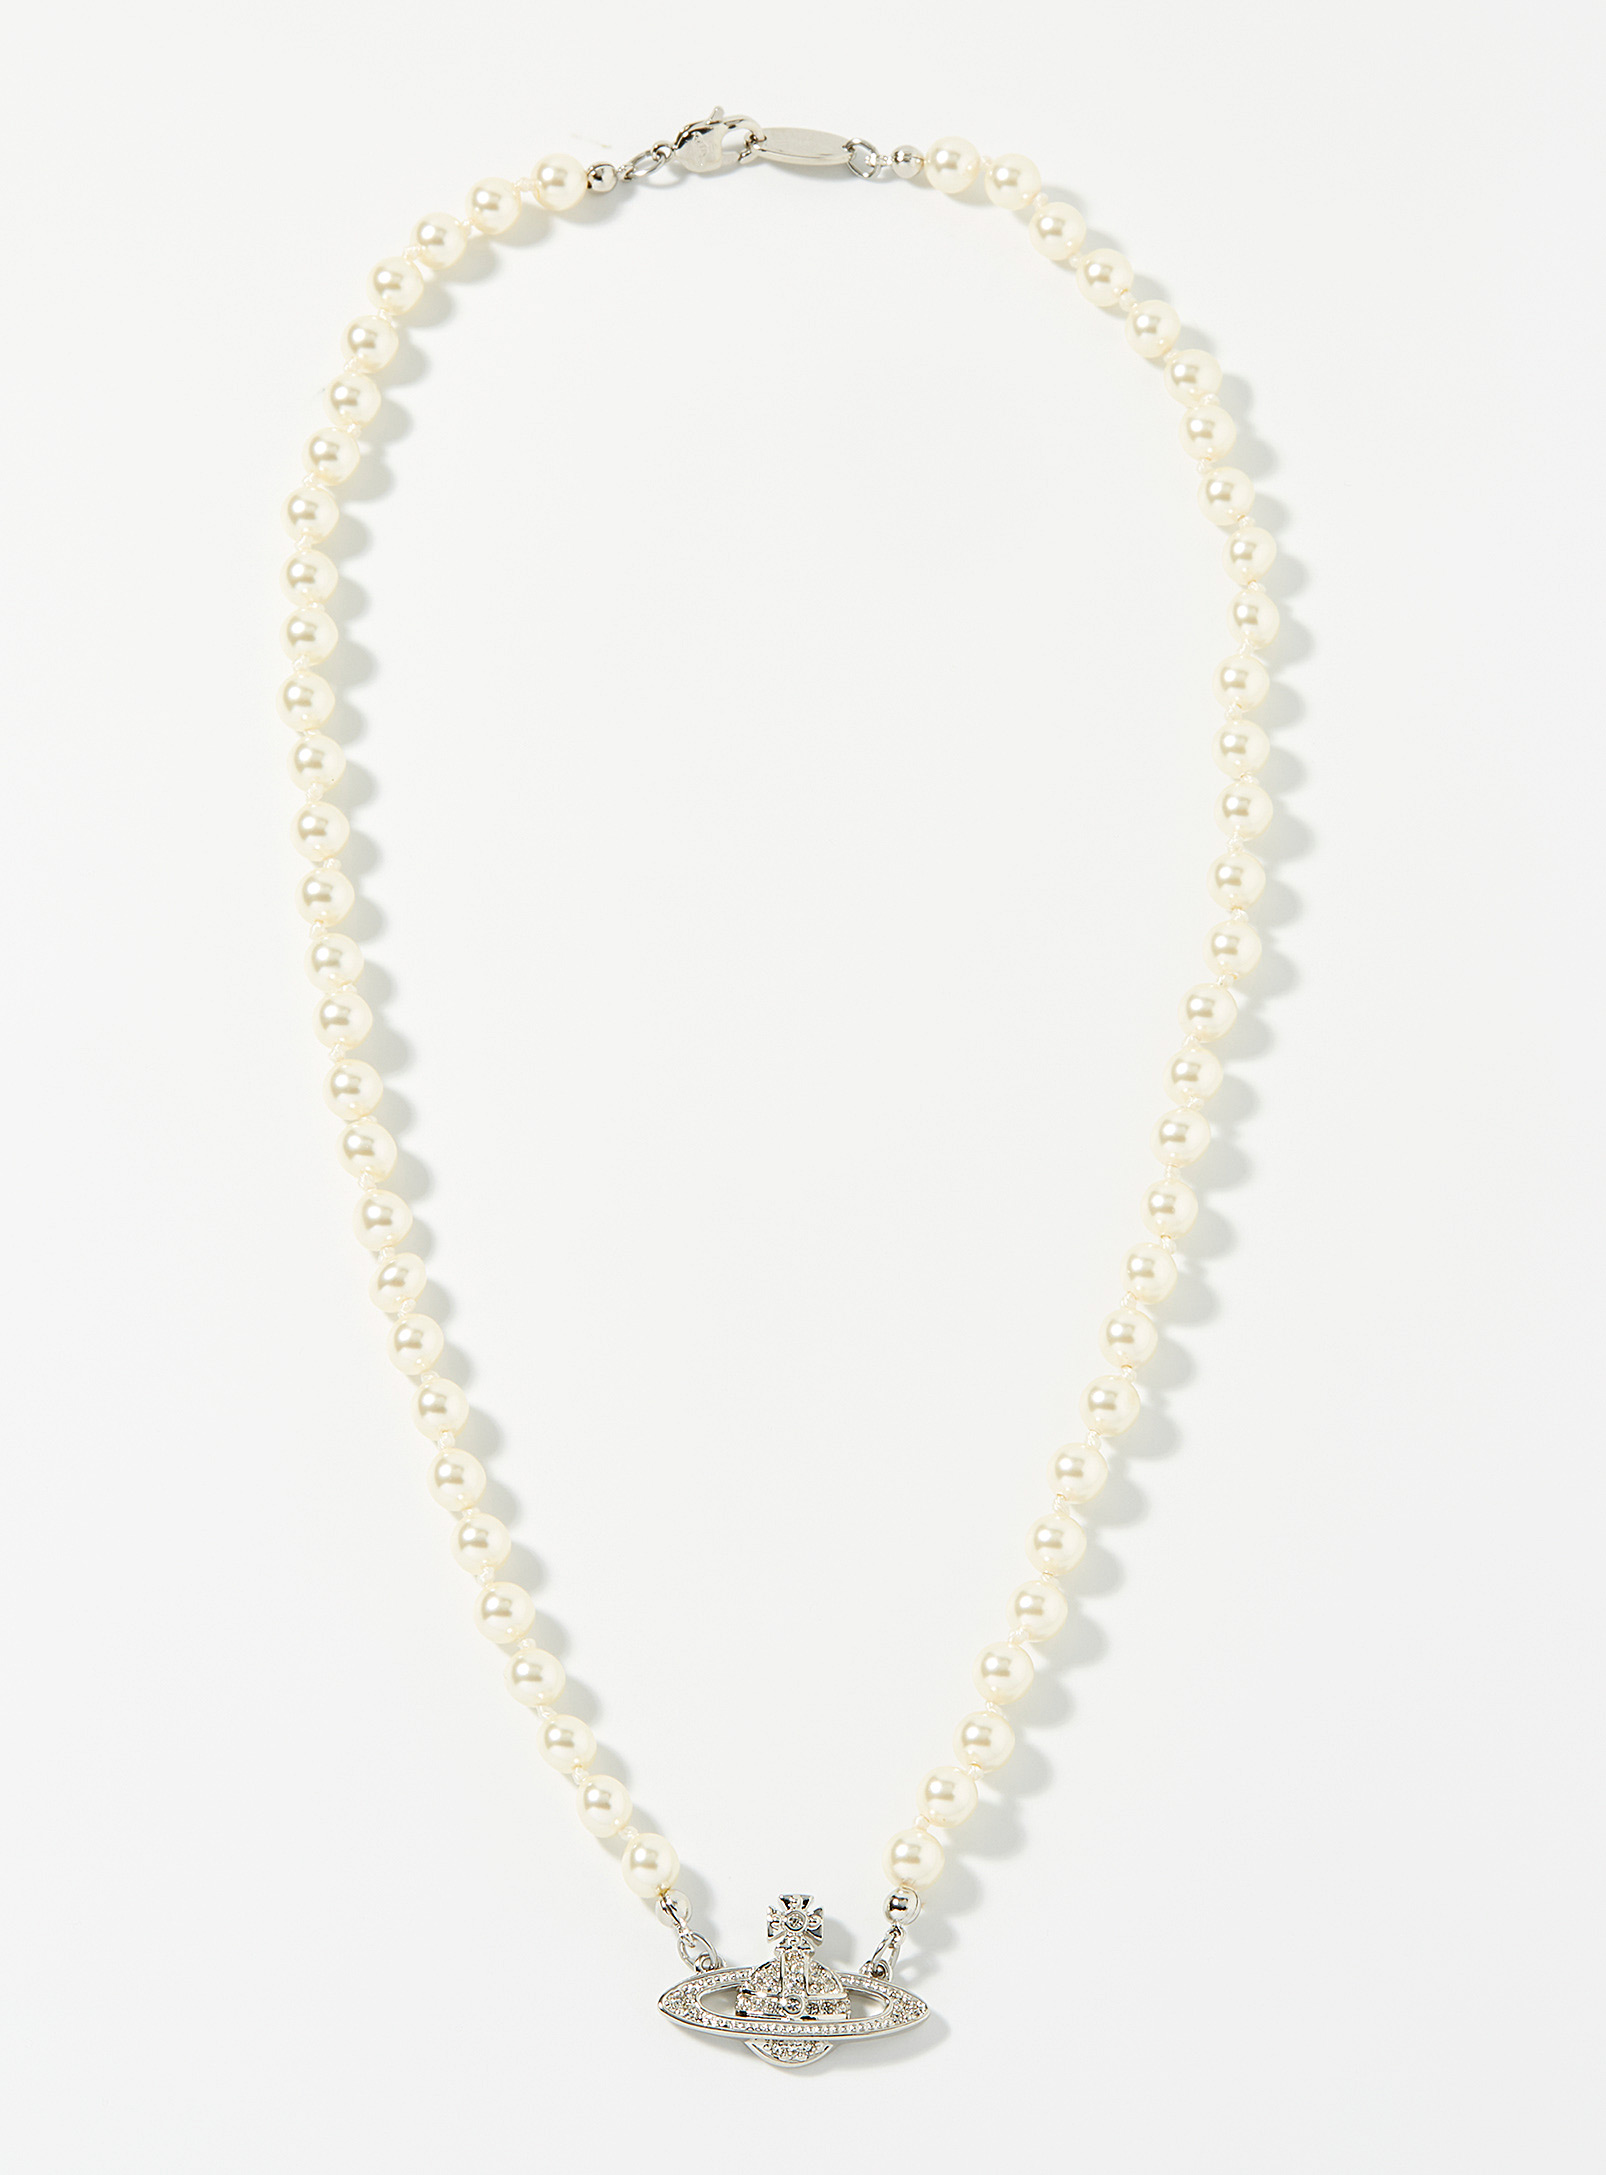 Vivienne Westwood - Men's Bas Relief pearly bead necklace